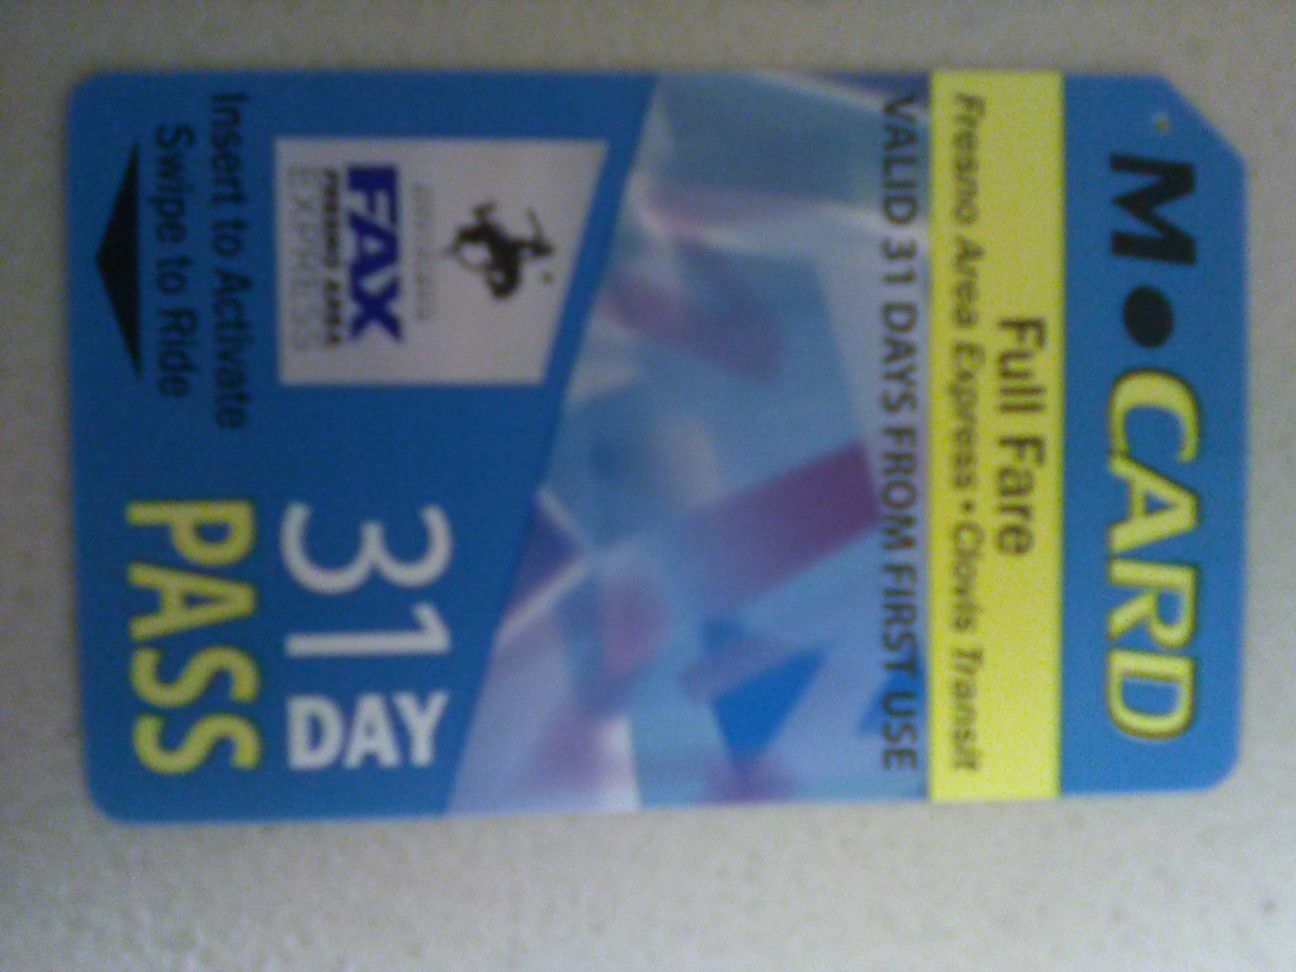 Monthly bus pass